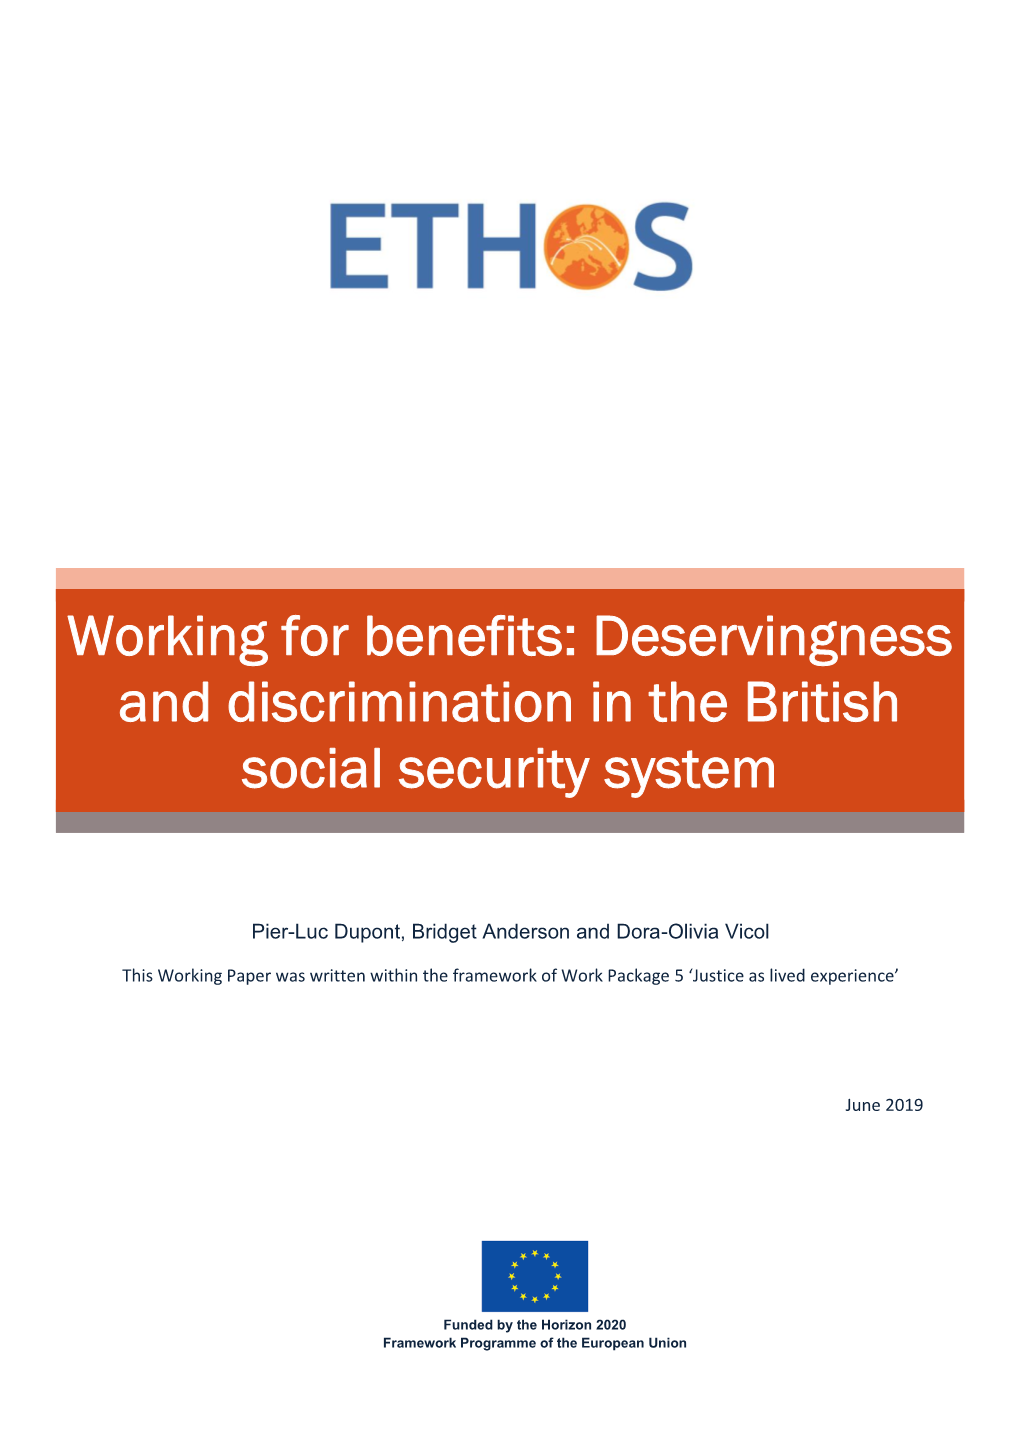 Deservingness and Discrimination in the British Social Security System